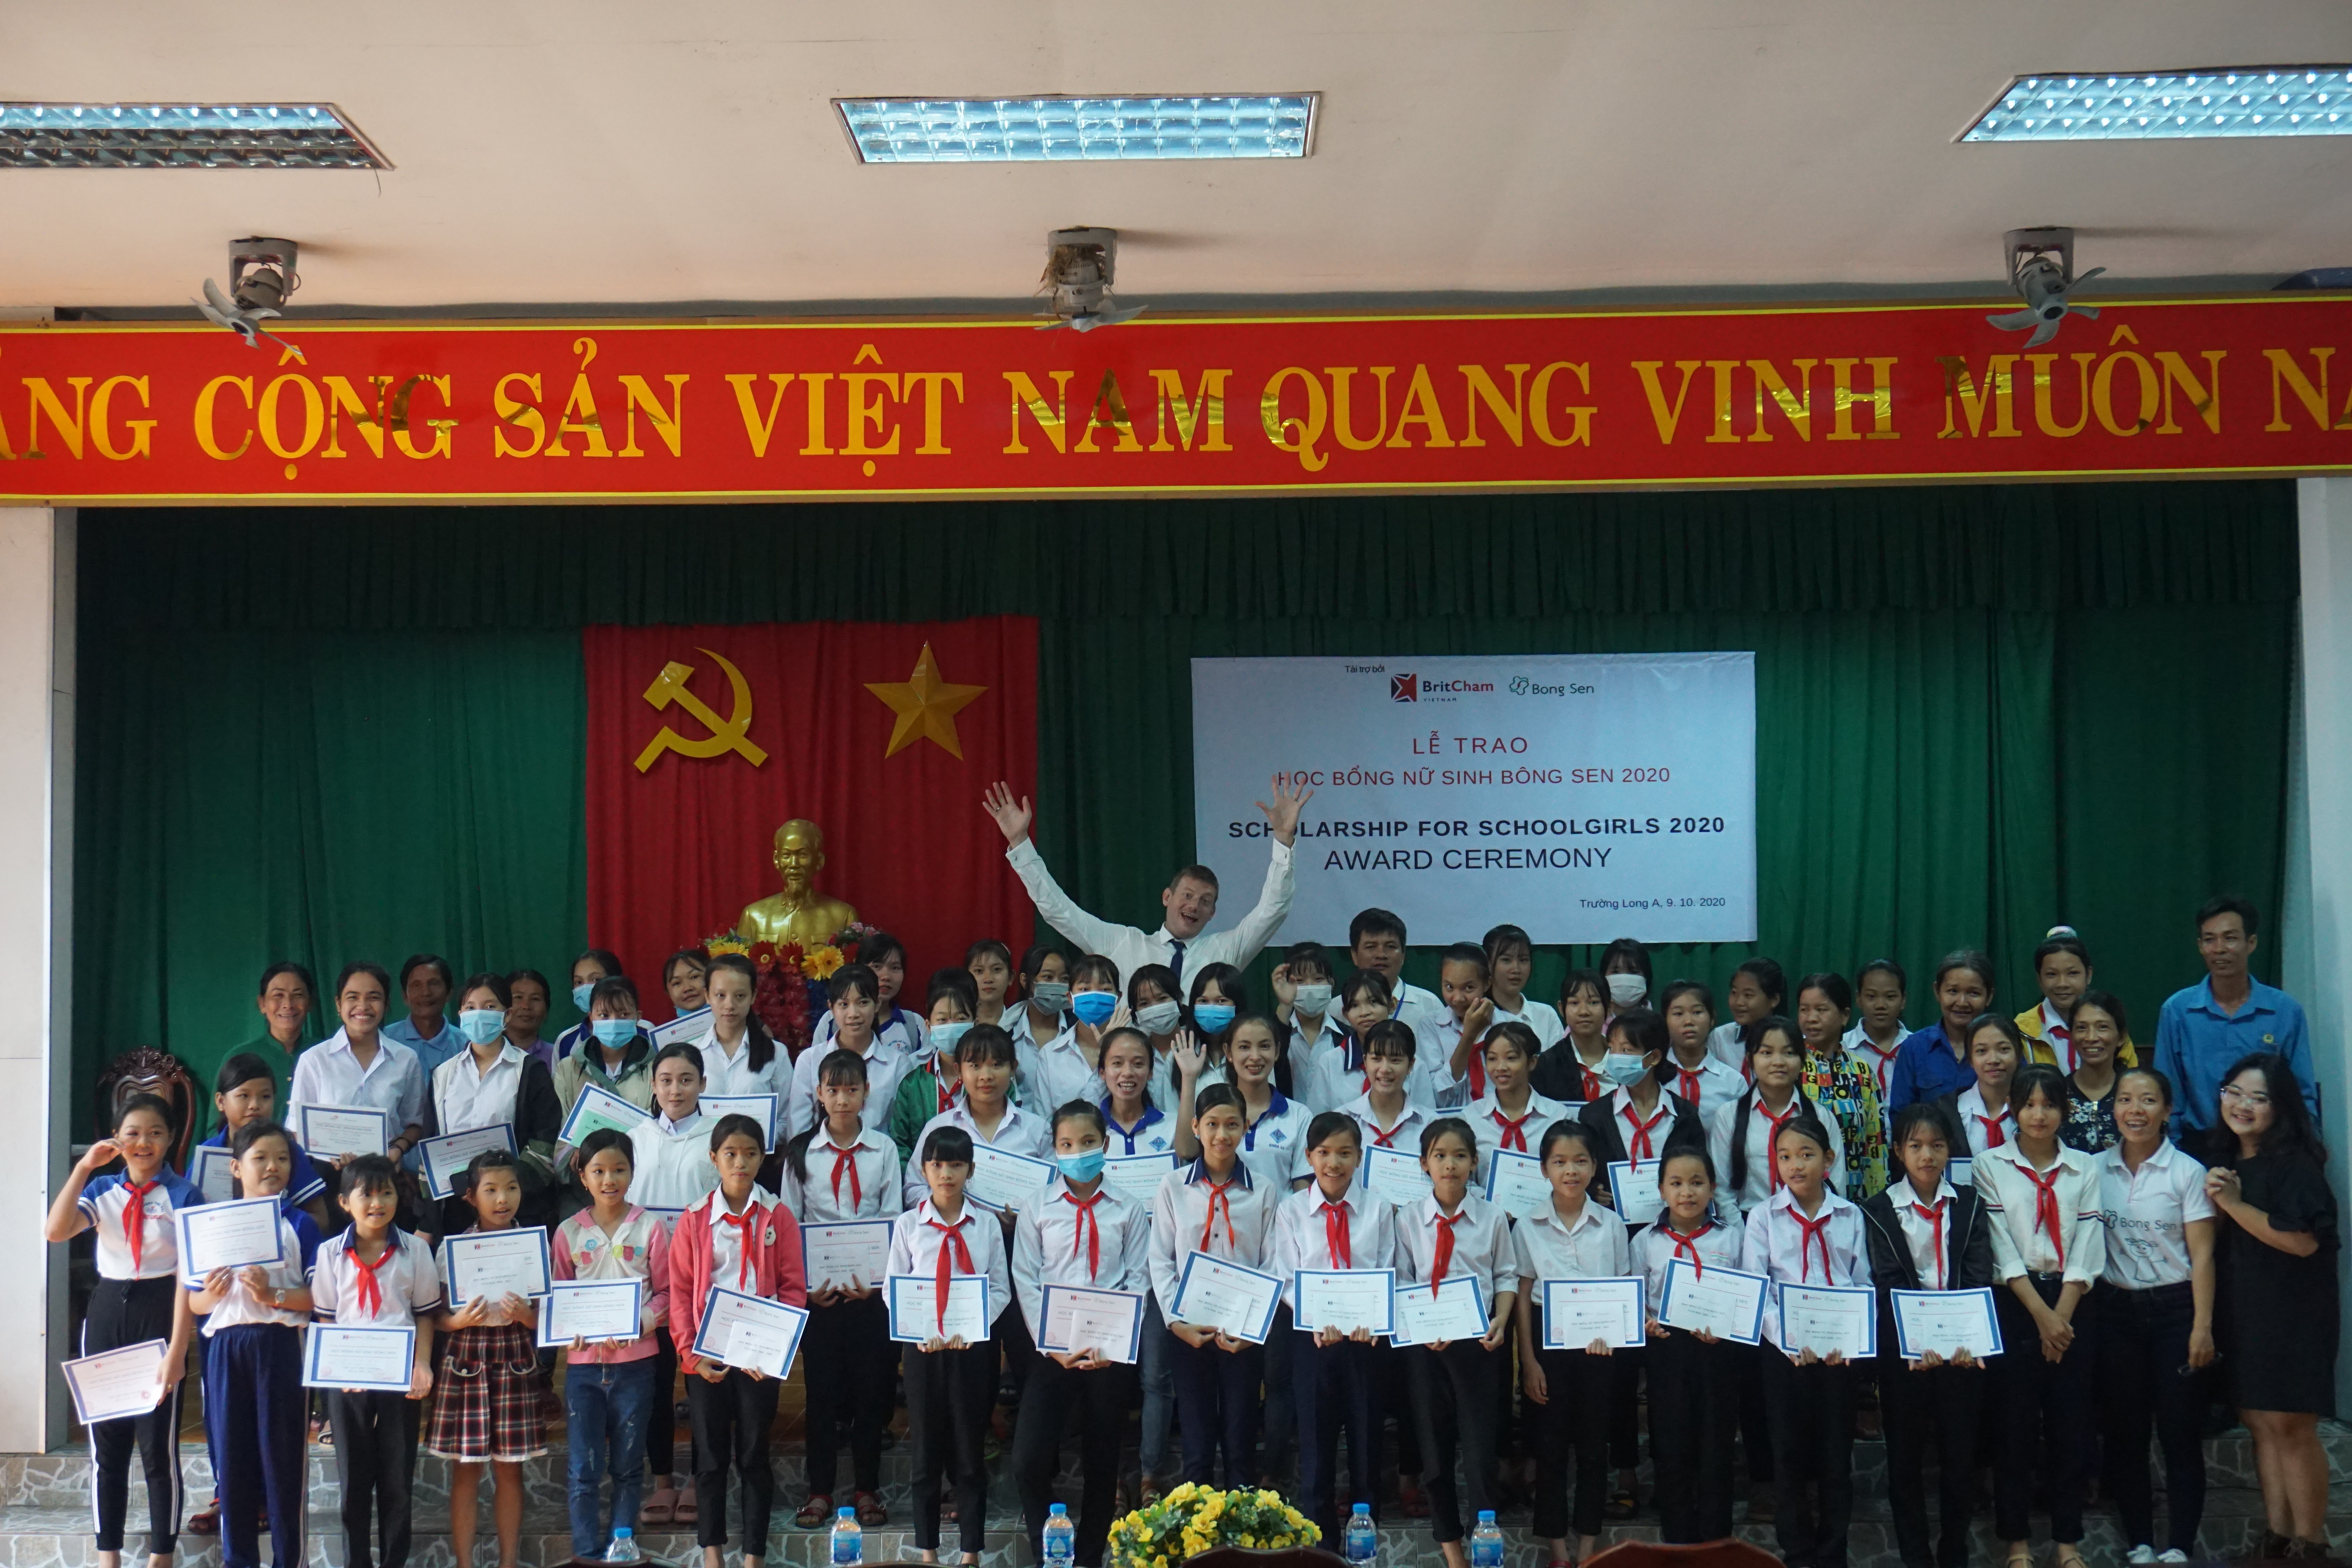 BritCham Vietnam donates VND80 million to Bong Sen Centre for Community Development to provide scholarships for 90 schoolgirls in Hau Giang Province. Photo: Supplied